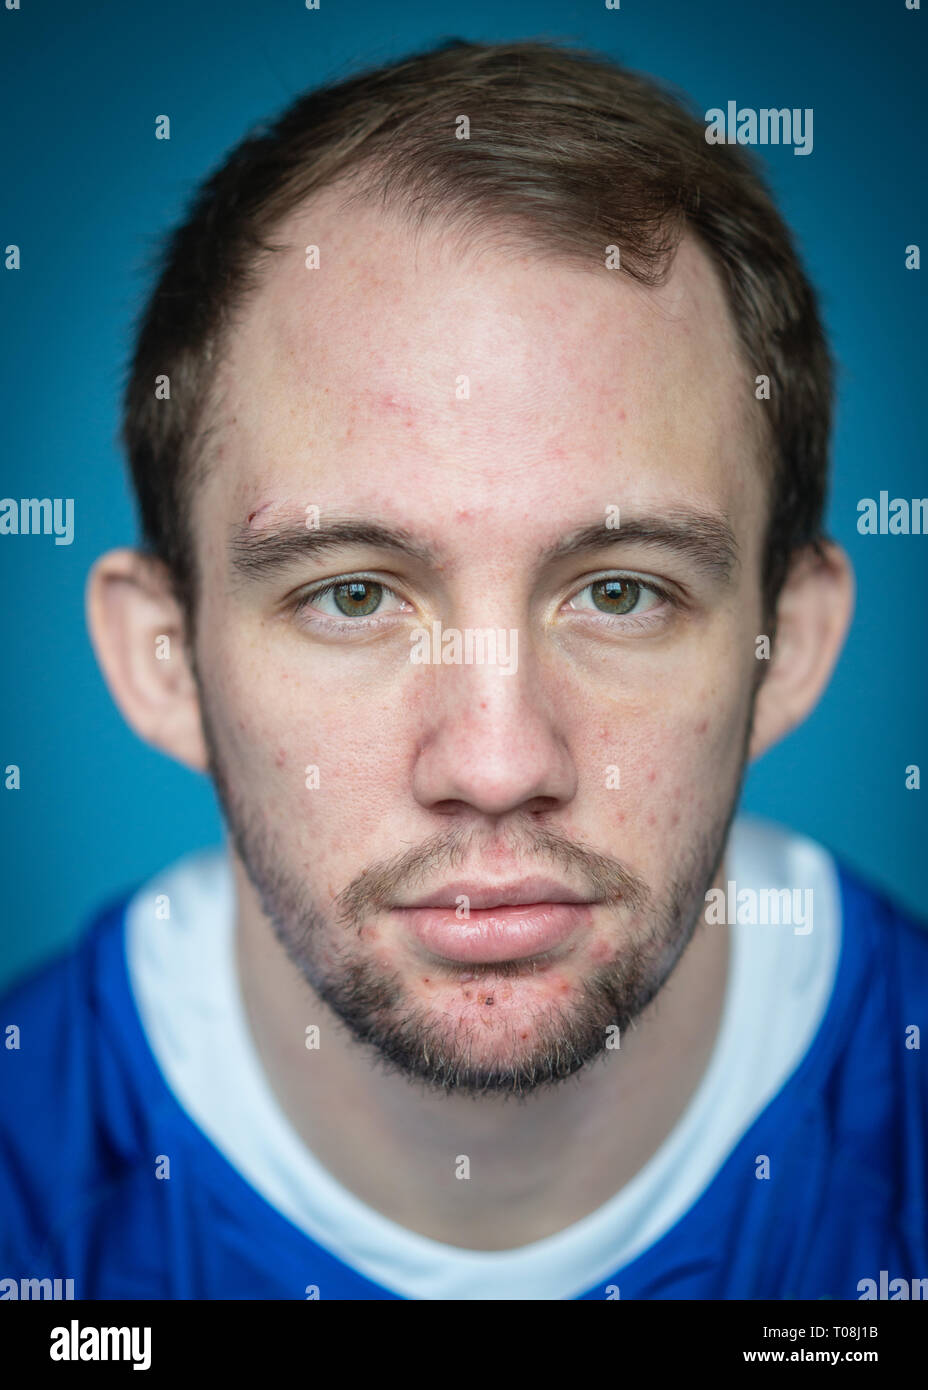 Rugby League, Super League, Wakefield Trinity Squads 2019 Headshot.   Credit: Dean Williams Stock Photo